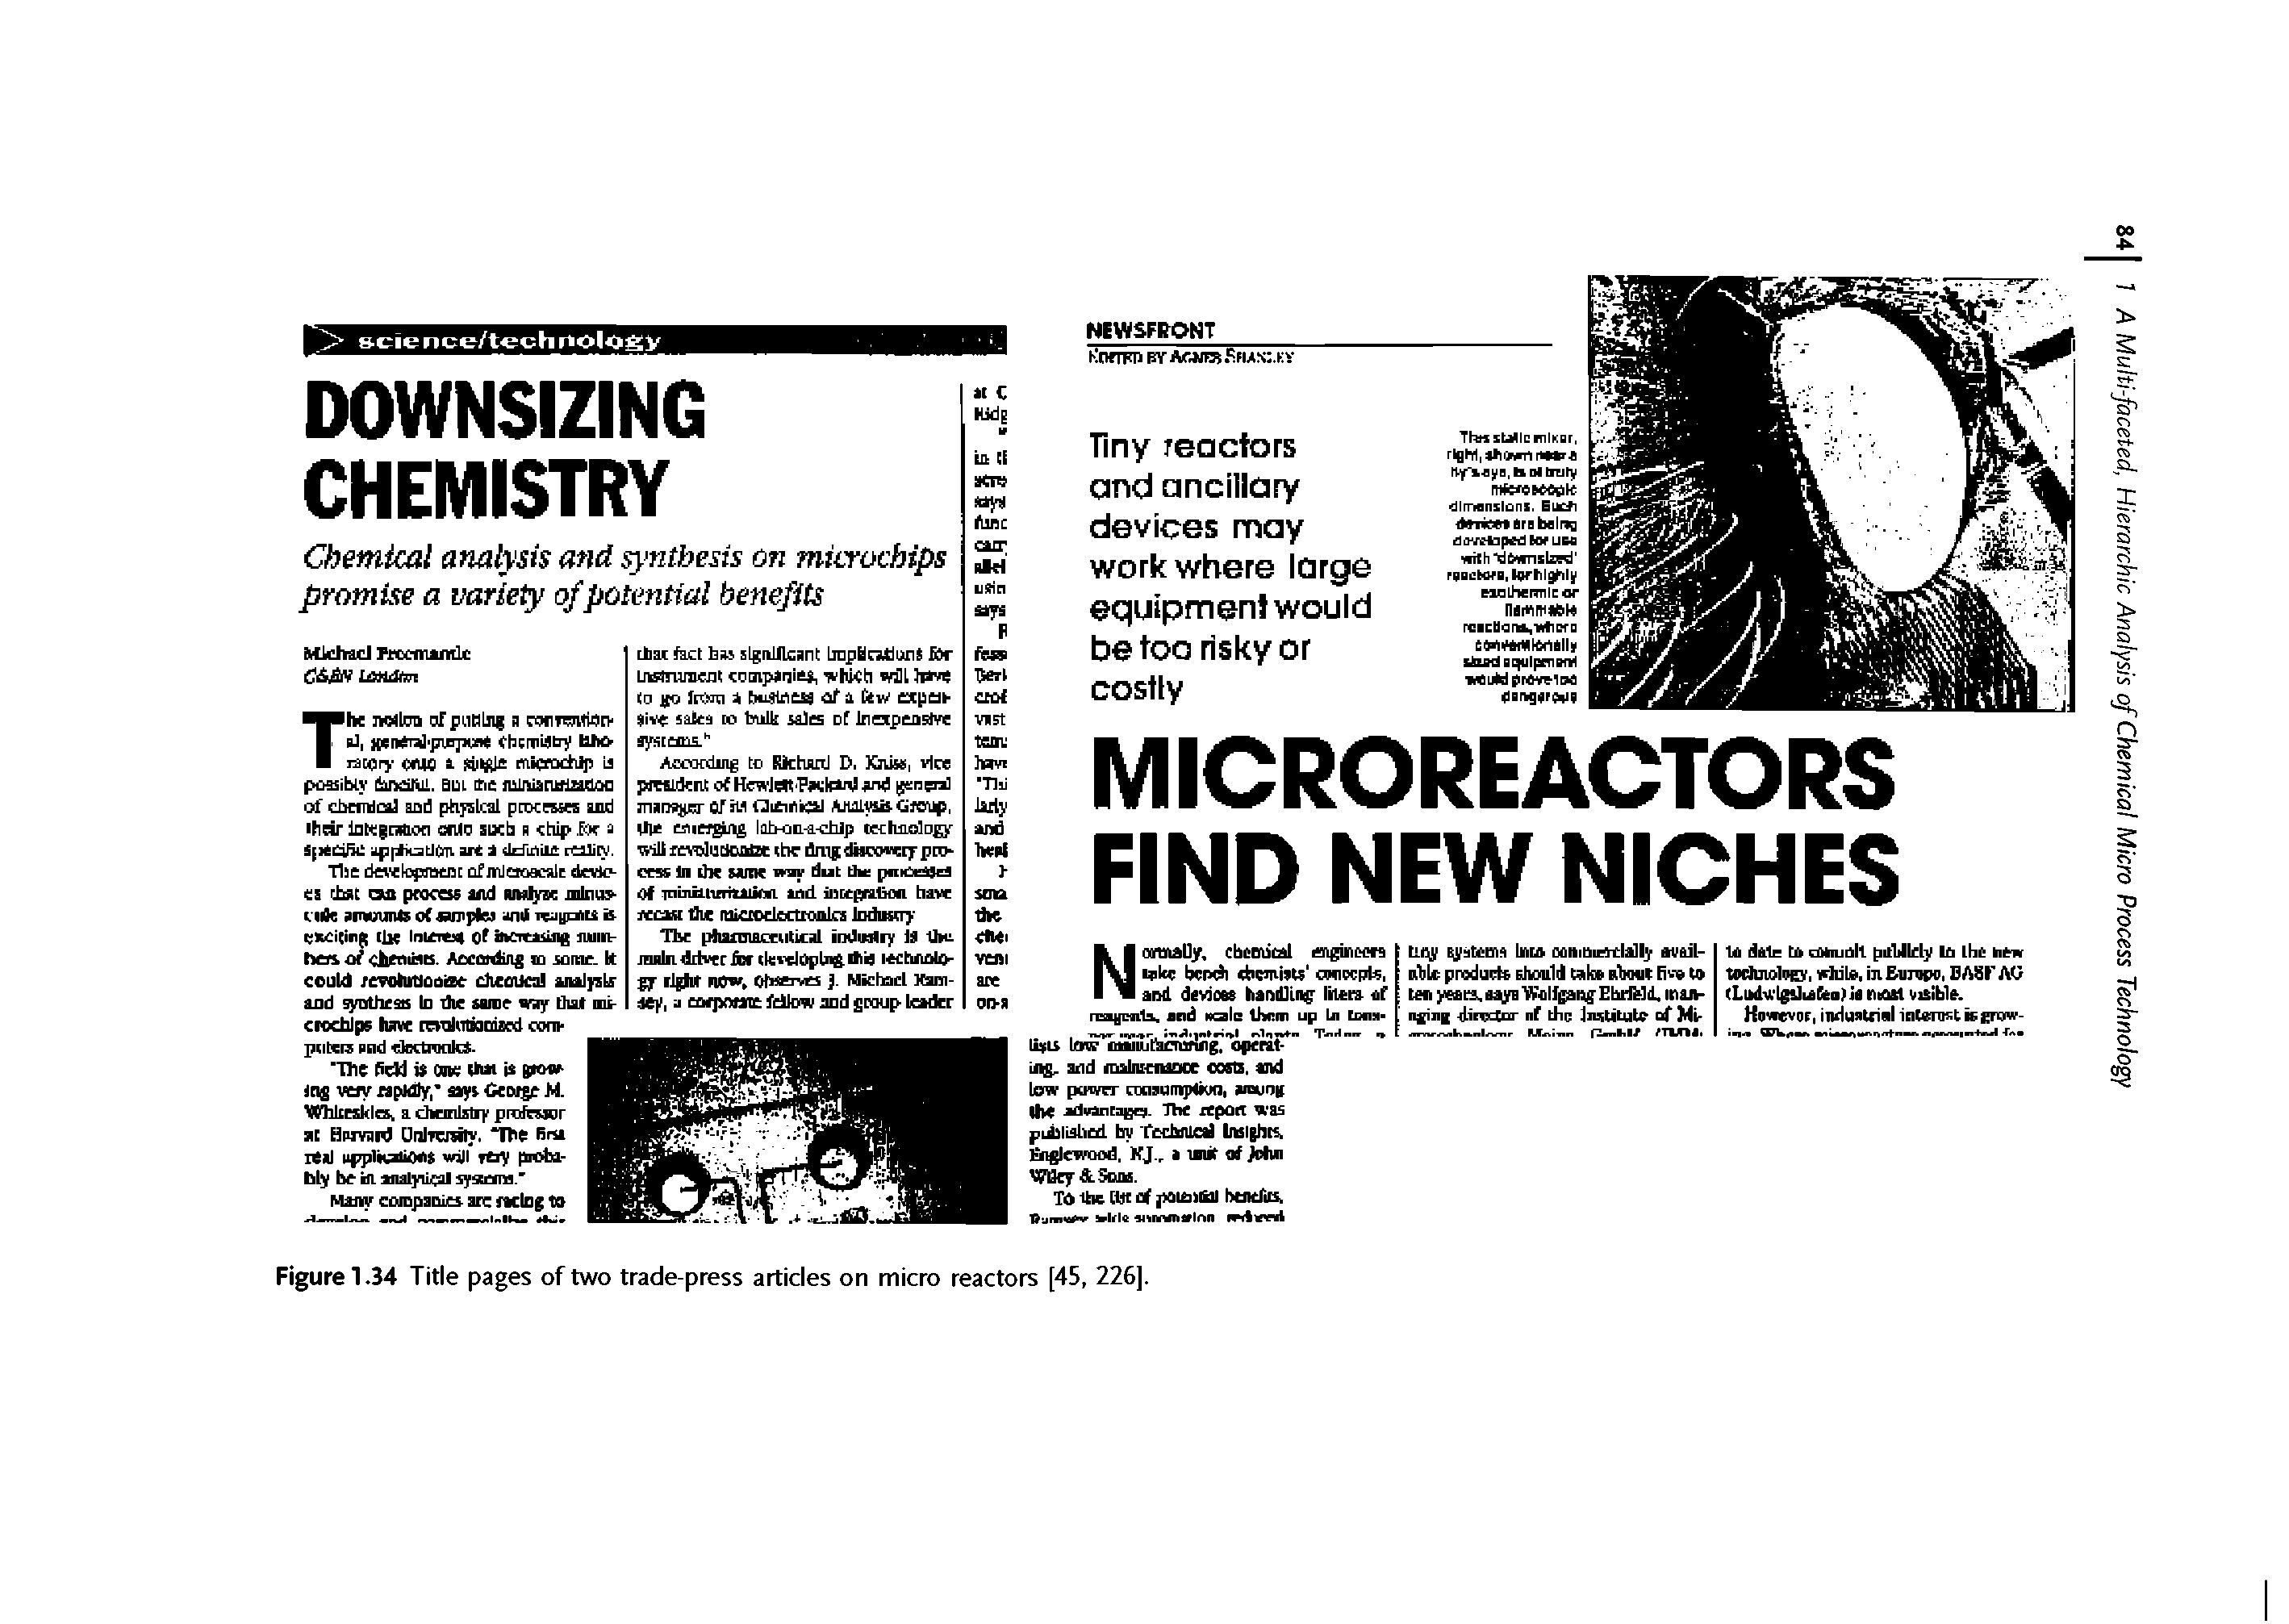 Figure 1.34 Title pages of two trade-press articles on micro reactors [45, 226].